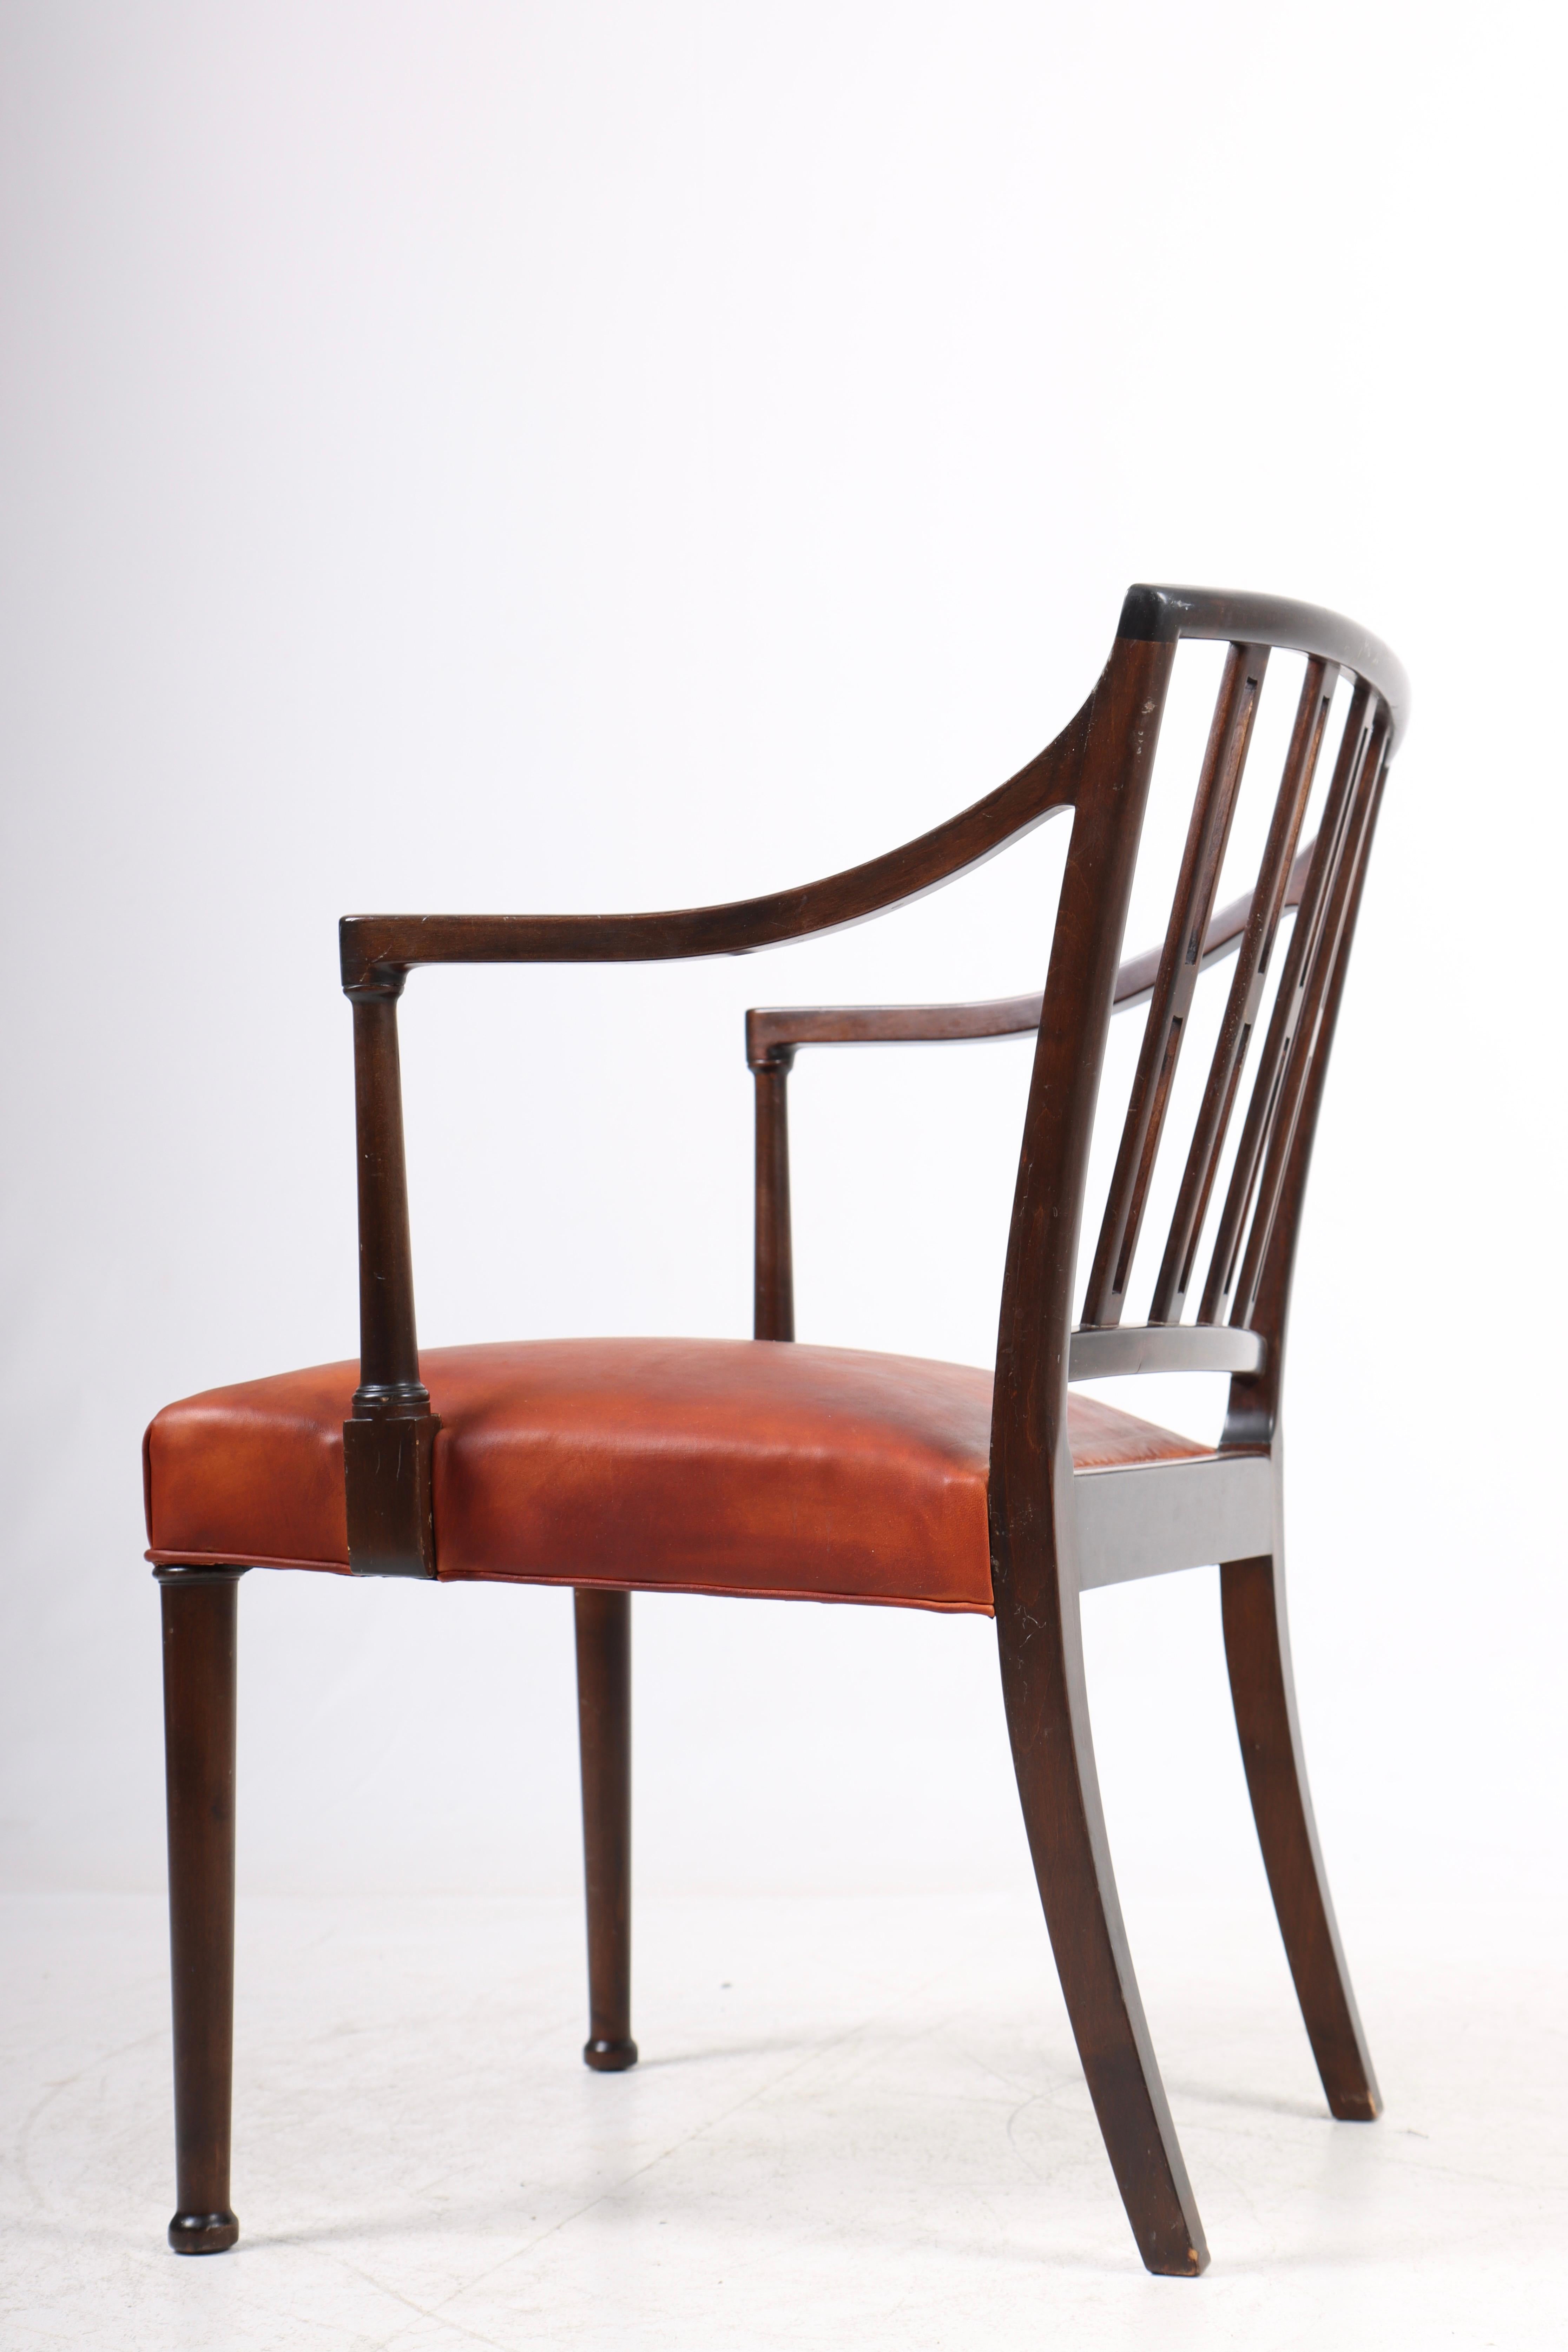 Danish Lounge Chair in Leather by Ole Wanscher, Made in Denmark, 1950s For Sale